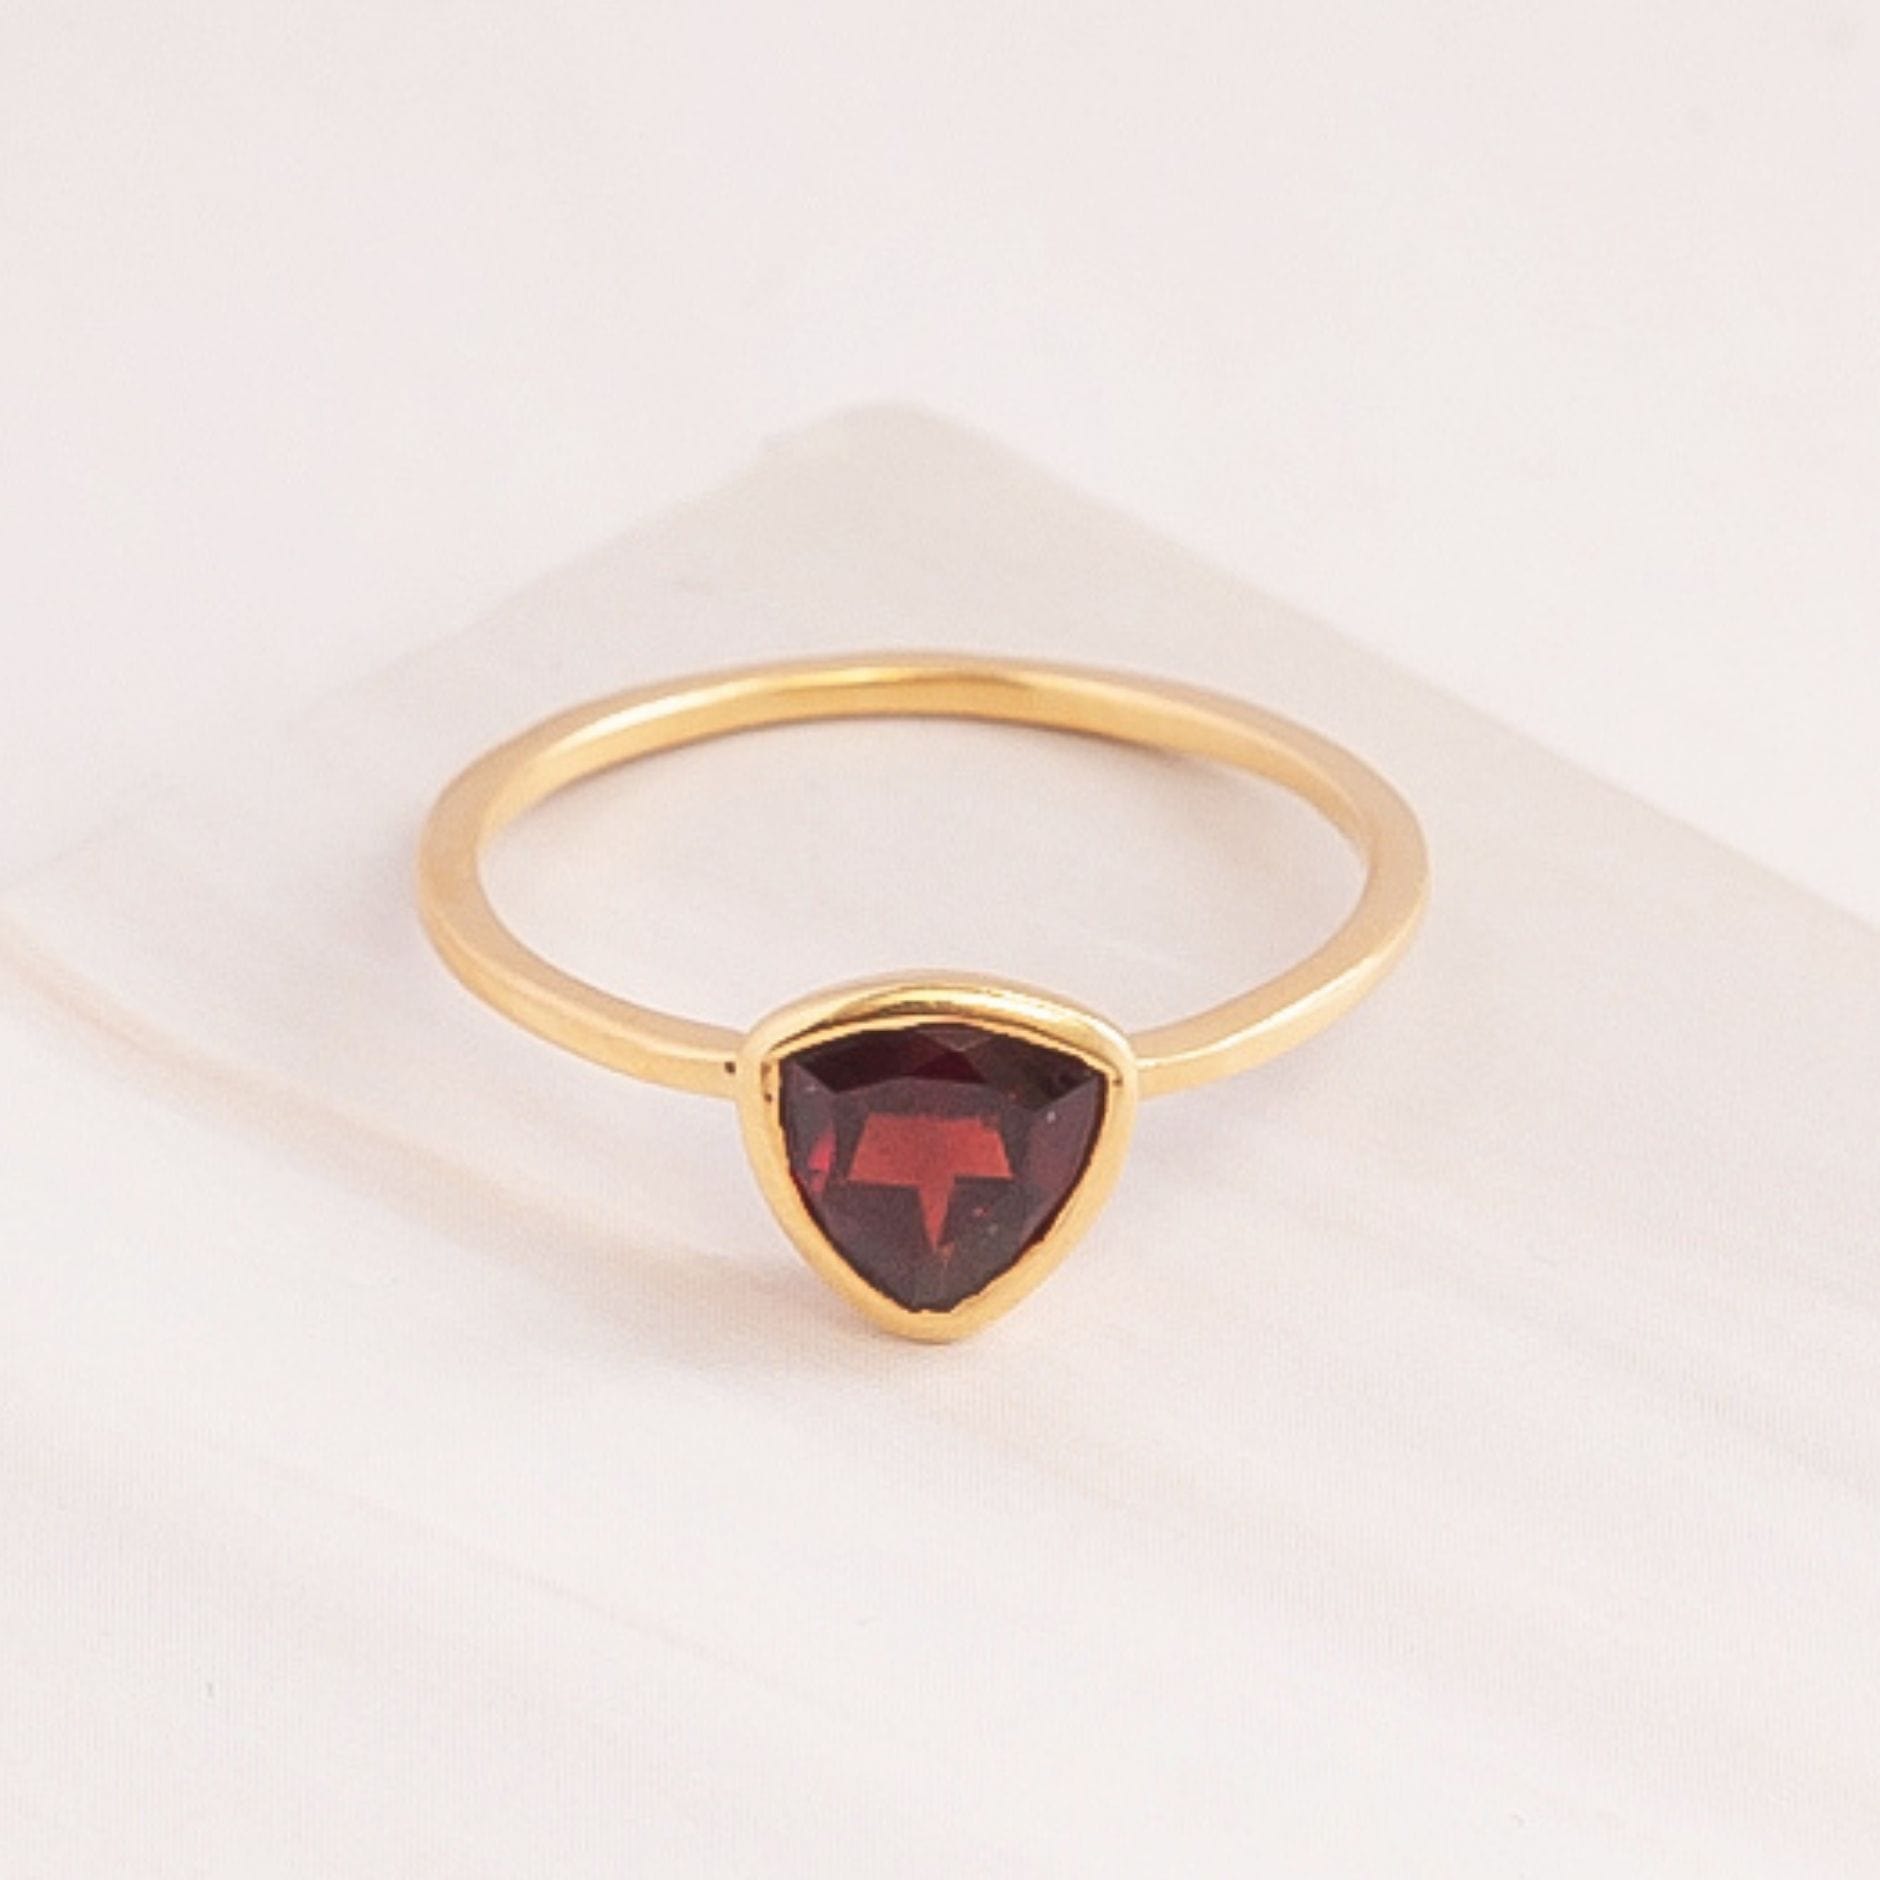 Emblem Jewelry Rings Red Garnet / Triangle Signature Candy Gemstone Stack Rings (Ring Size 4)